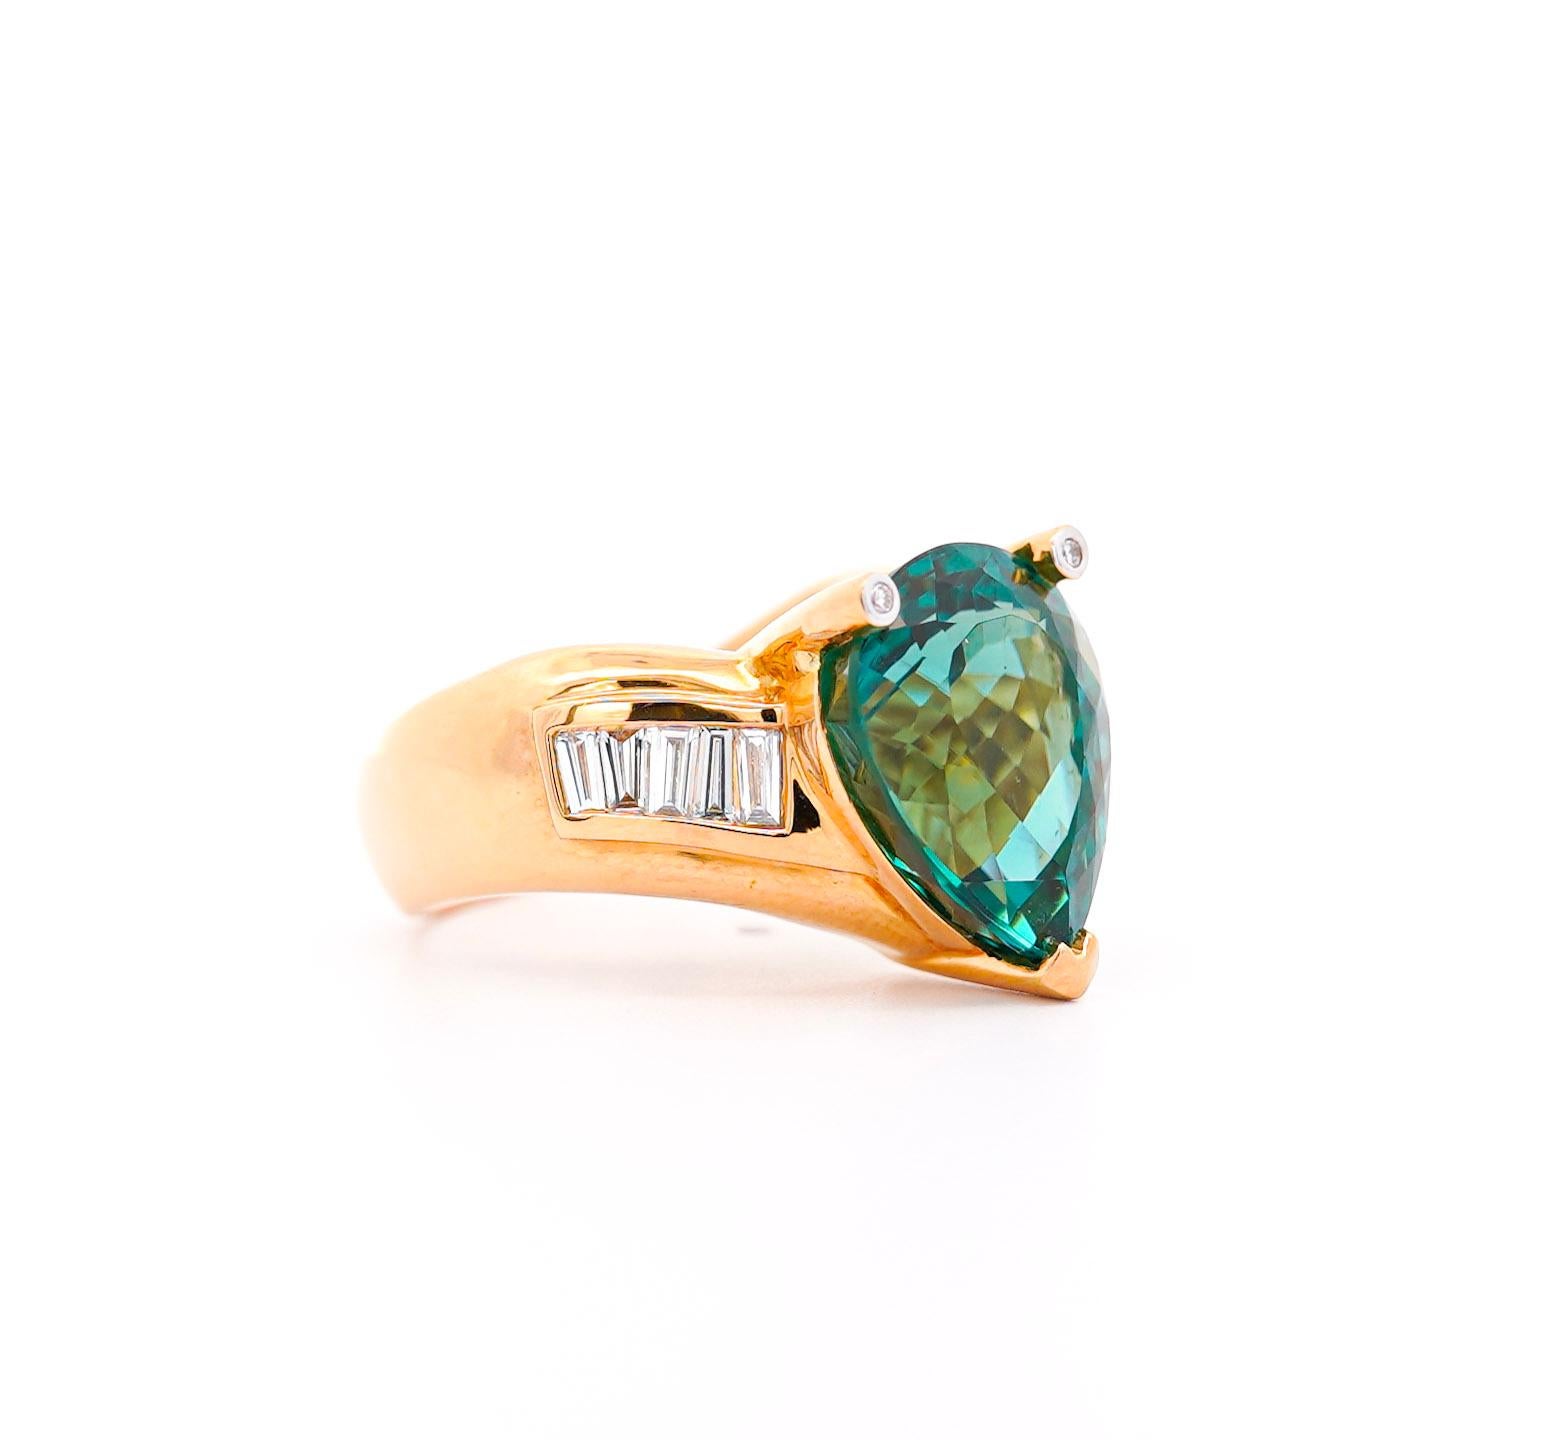 GIA Certified 11 carat bluish green tourmaline and white diamond ring in 18k yellow gold. Featuring a curved v-shaped ring shank that compliments the pear cut center stone. Fixed with baguette-cut natural diamond side stones.

The center stone bears